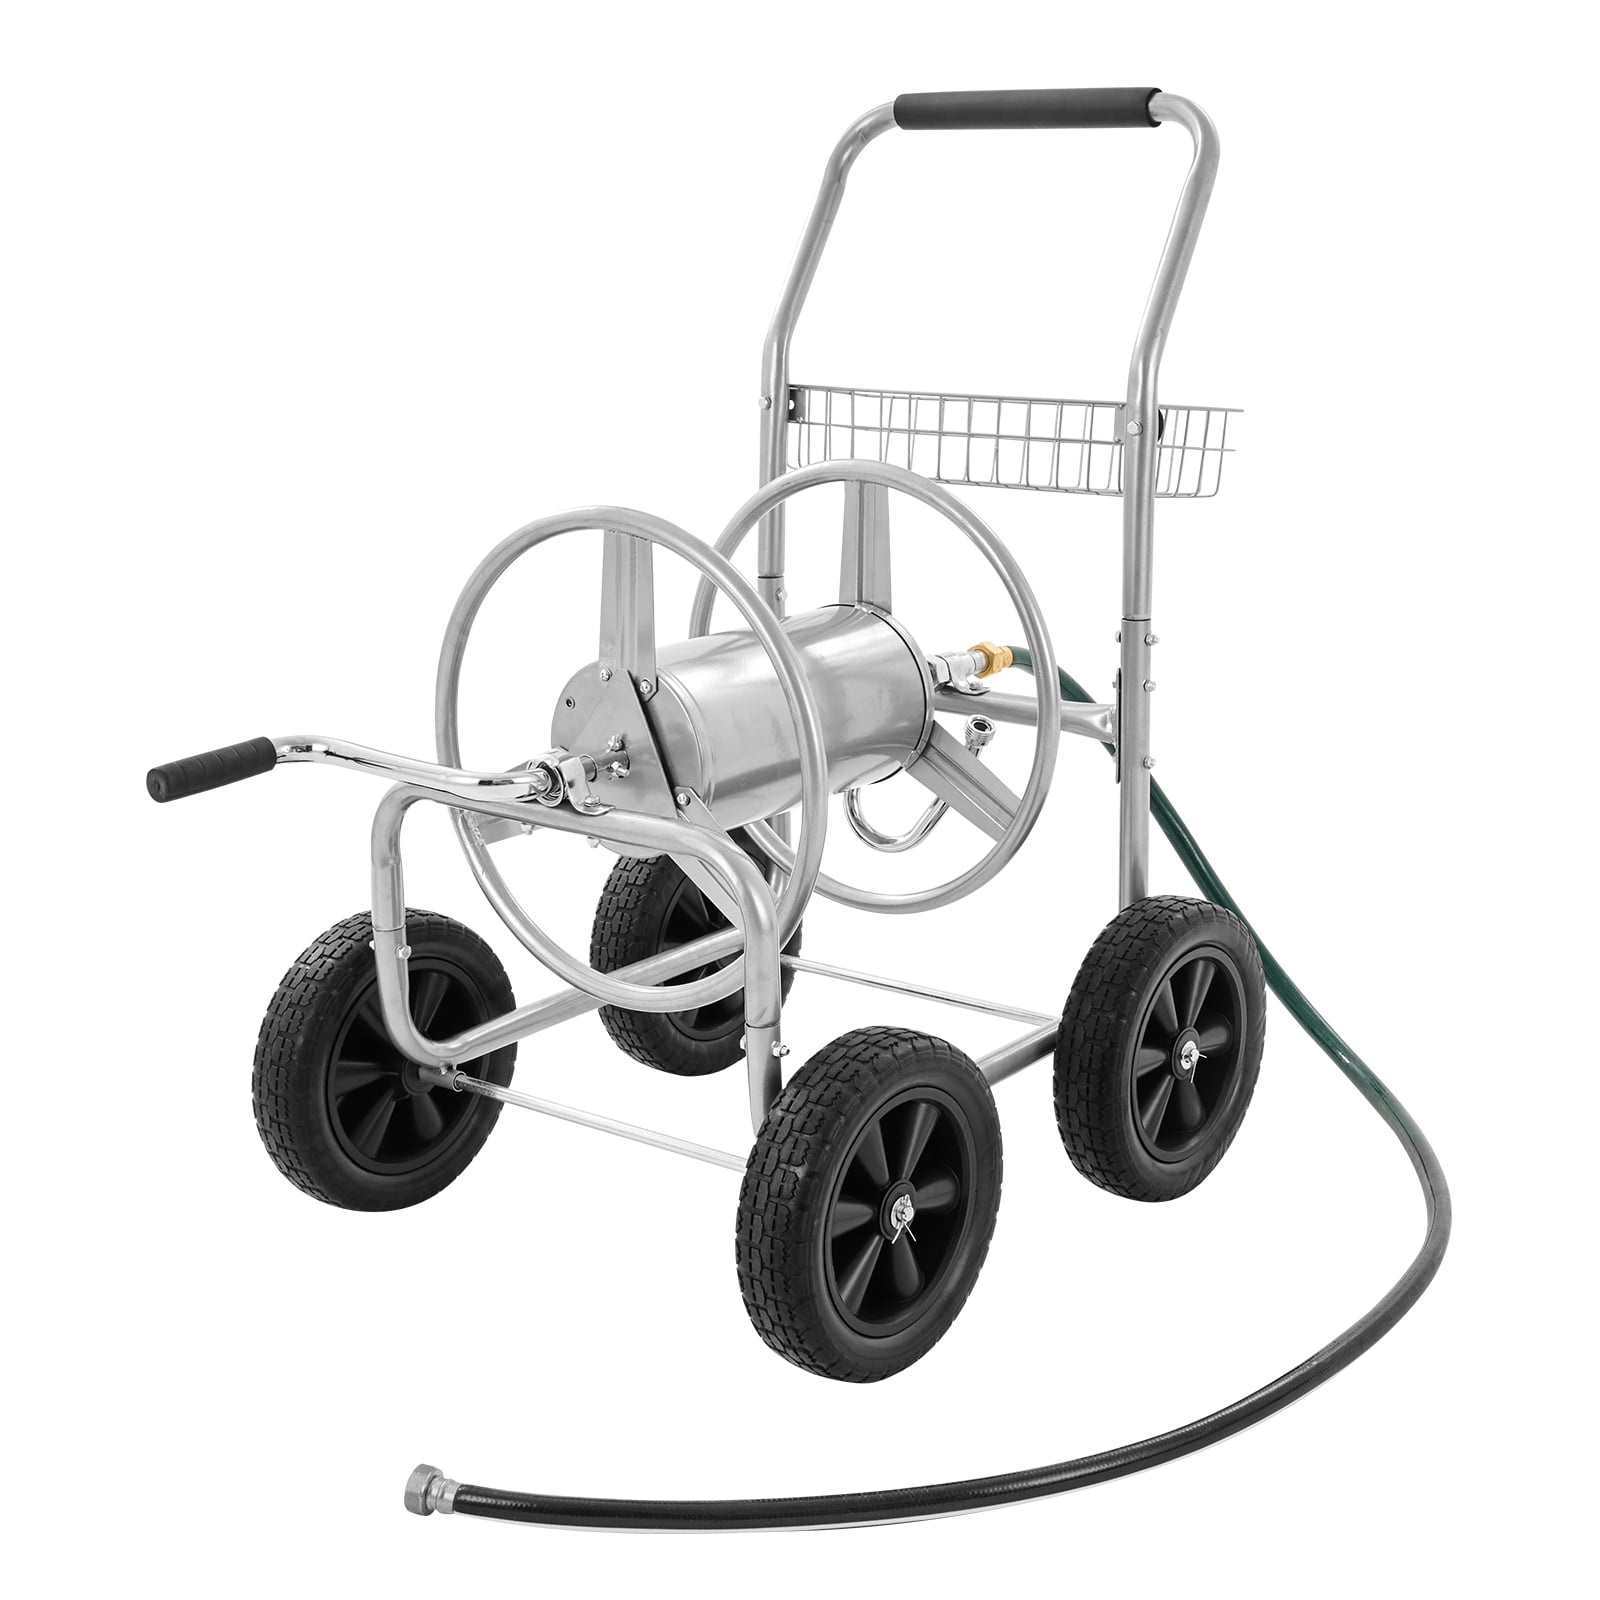 Ames 2384680NL NeverLeak 250 Hose Cart and Guide with 250 Foot